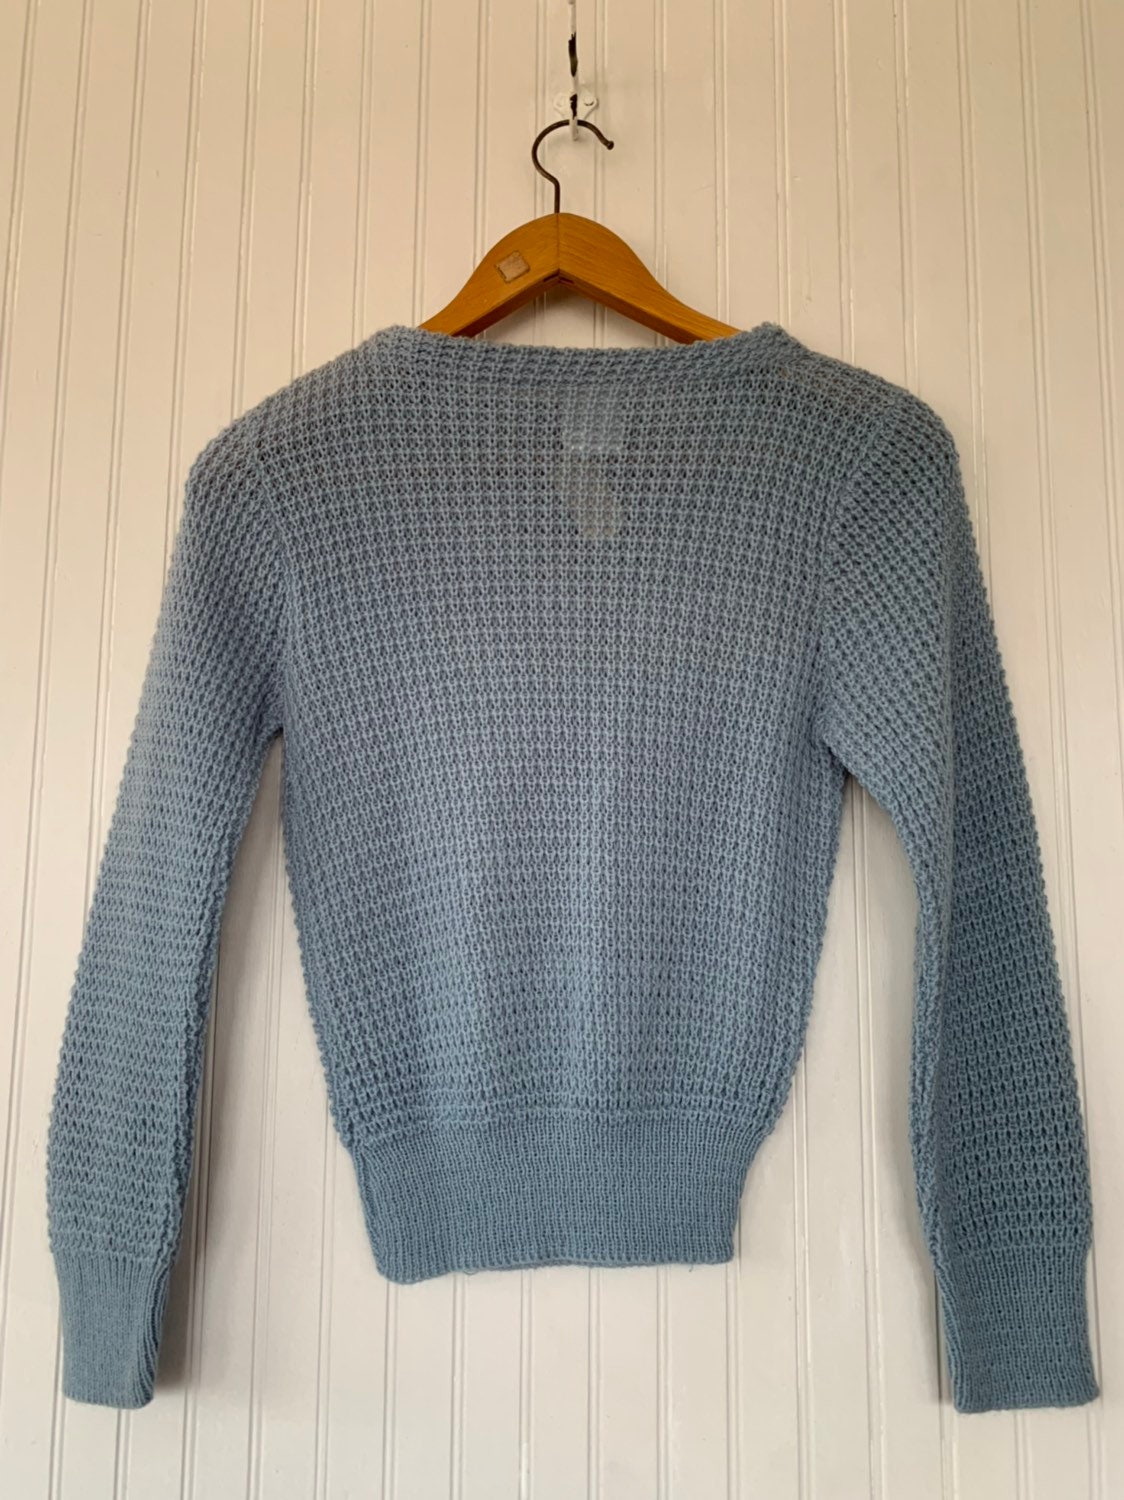 NWT Vintage 80s Baby Blue Pastel Knit Sweater Small Sm xs/s Long ...